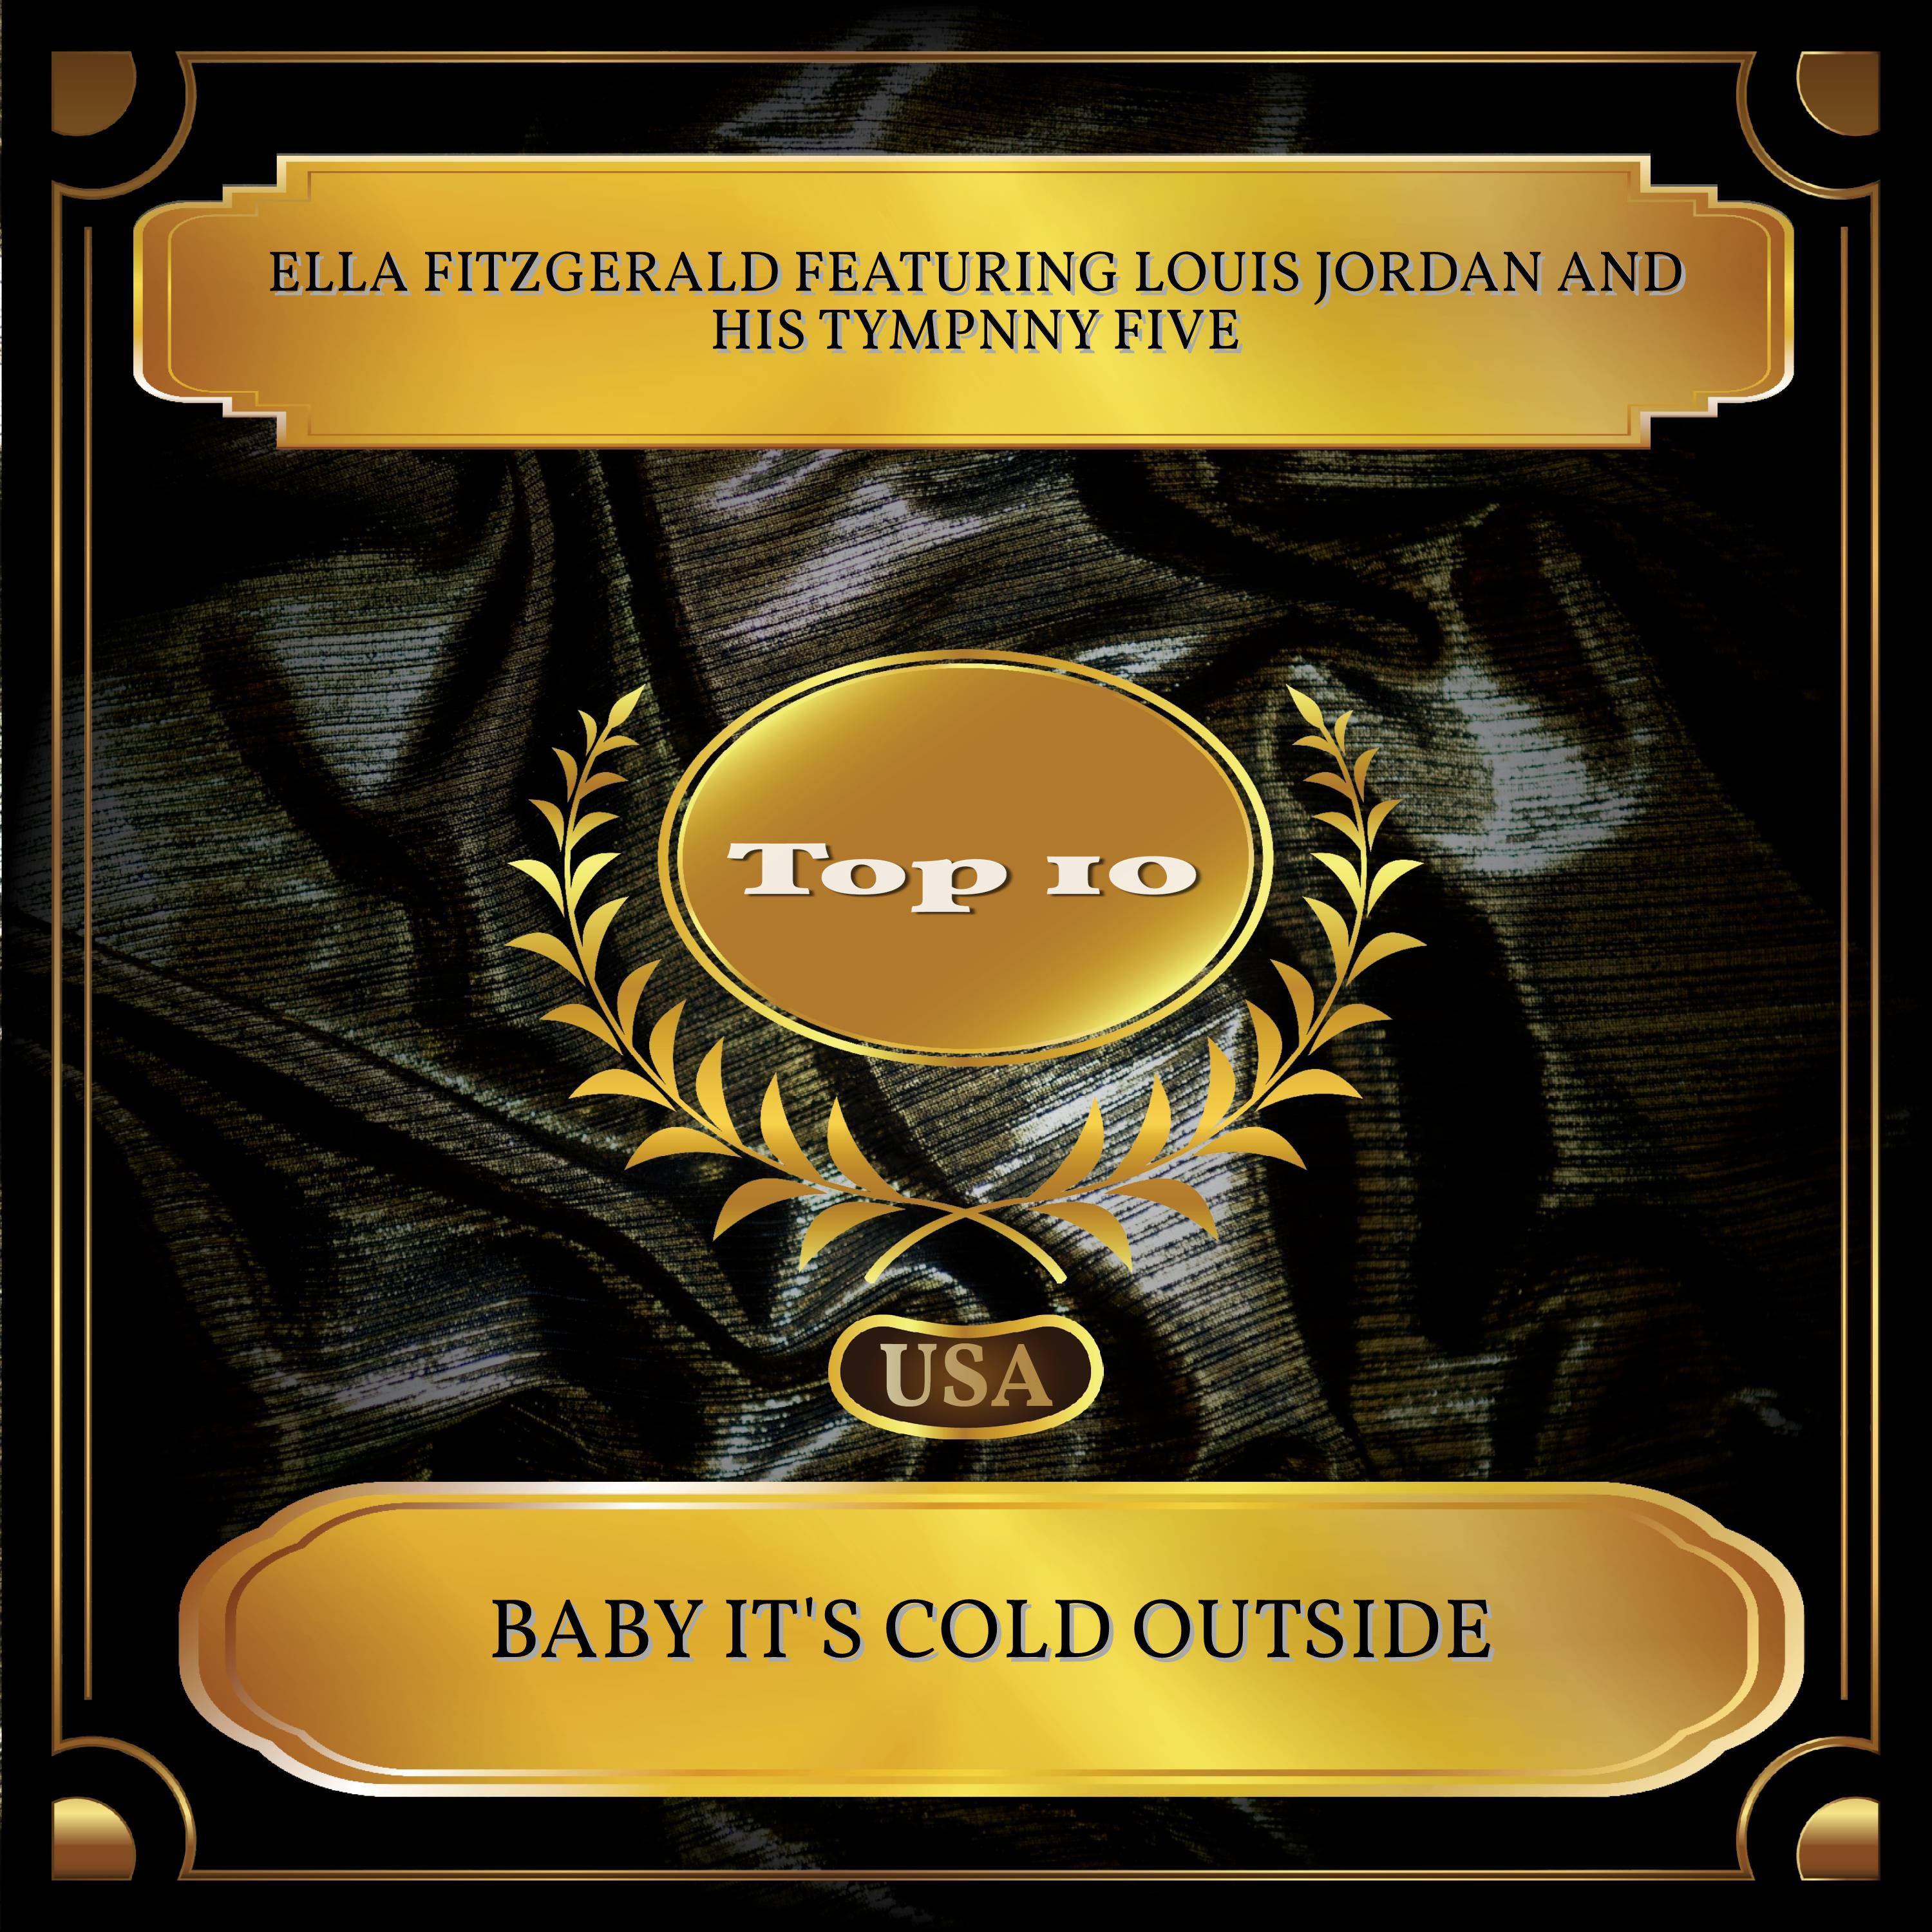 Baby It's Cold Outside (Billboard Hot 100 - No. 09)